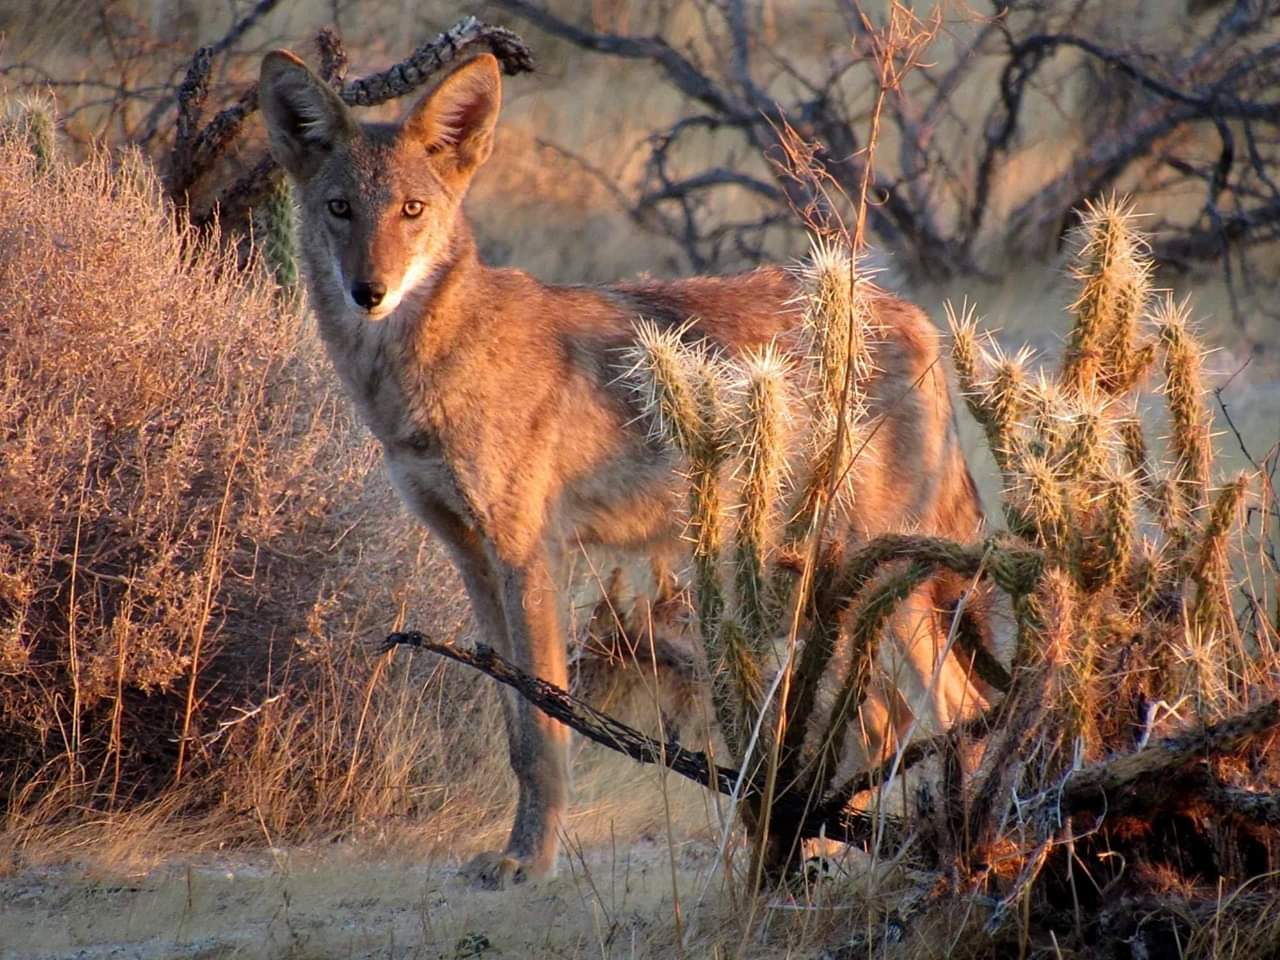 Photo of the Day - Coyote in Anza-Borrego Desert this morning stunning